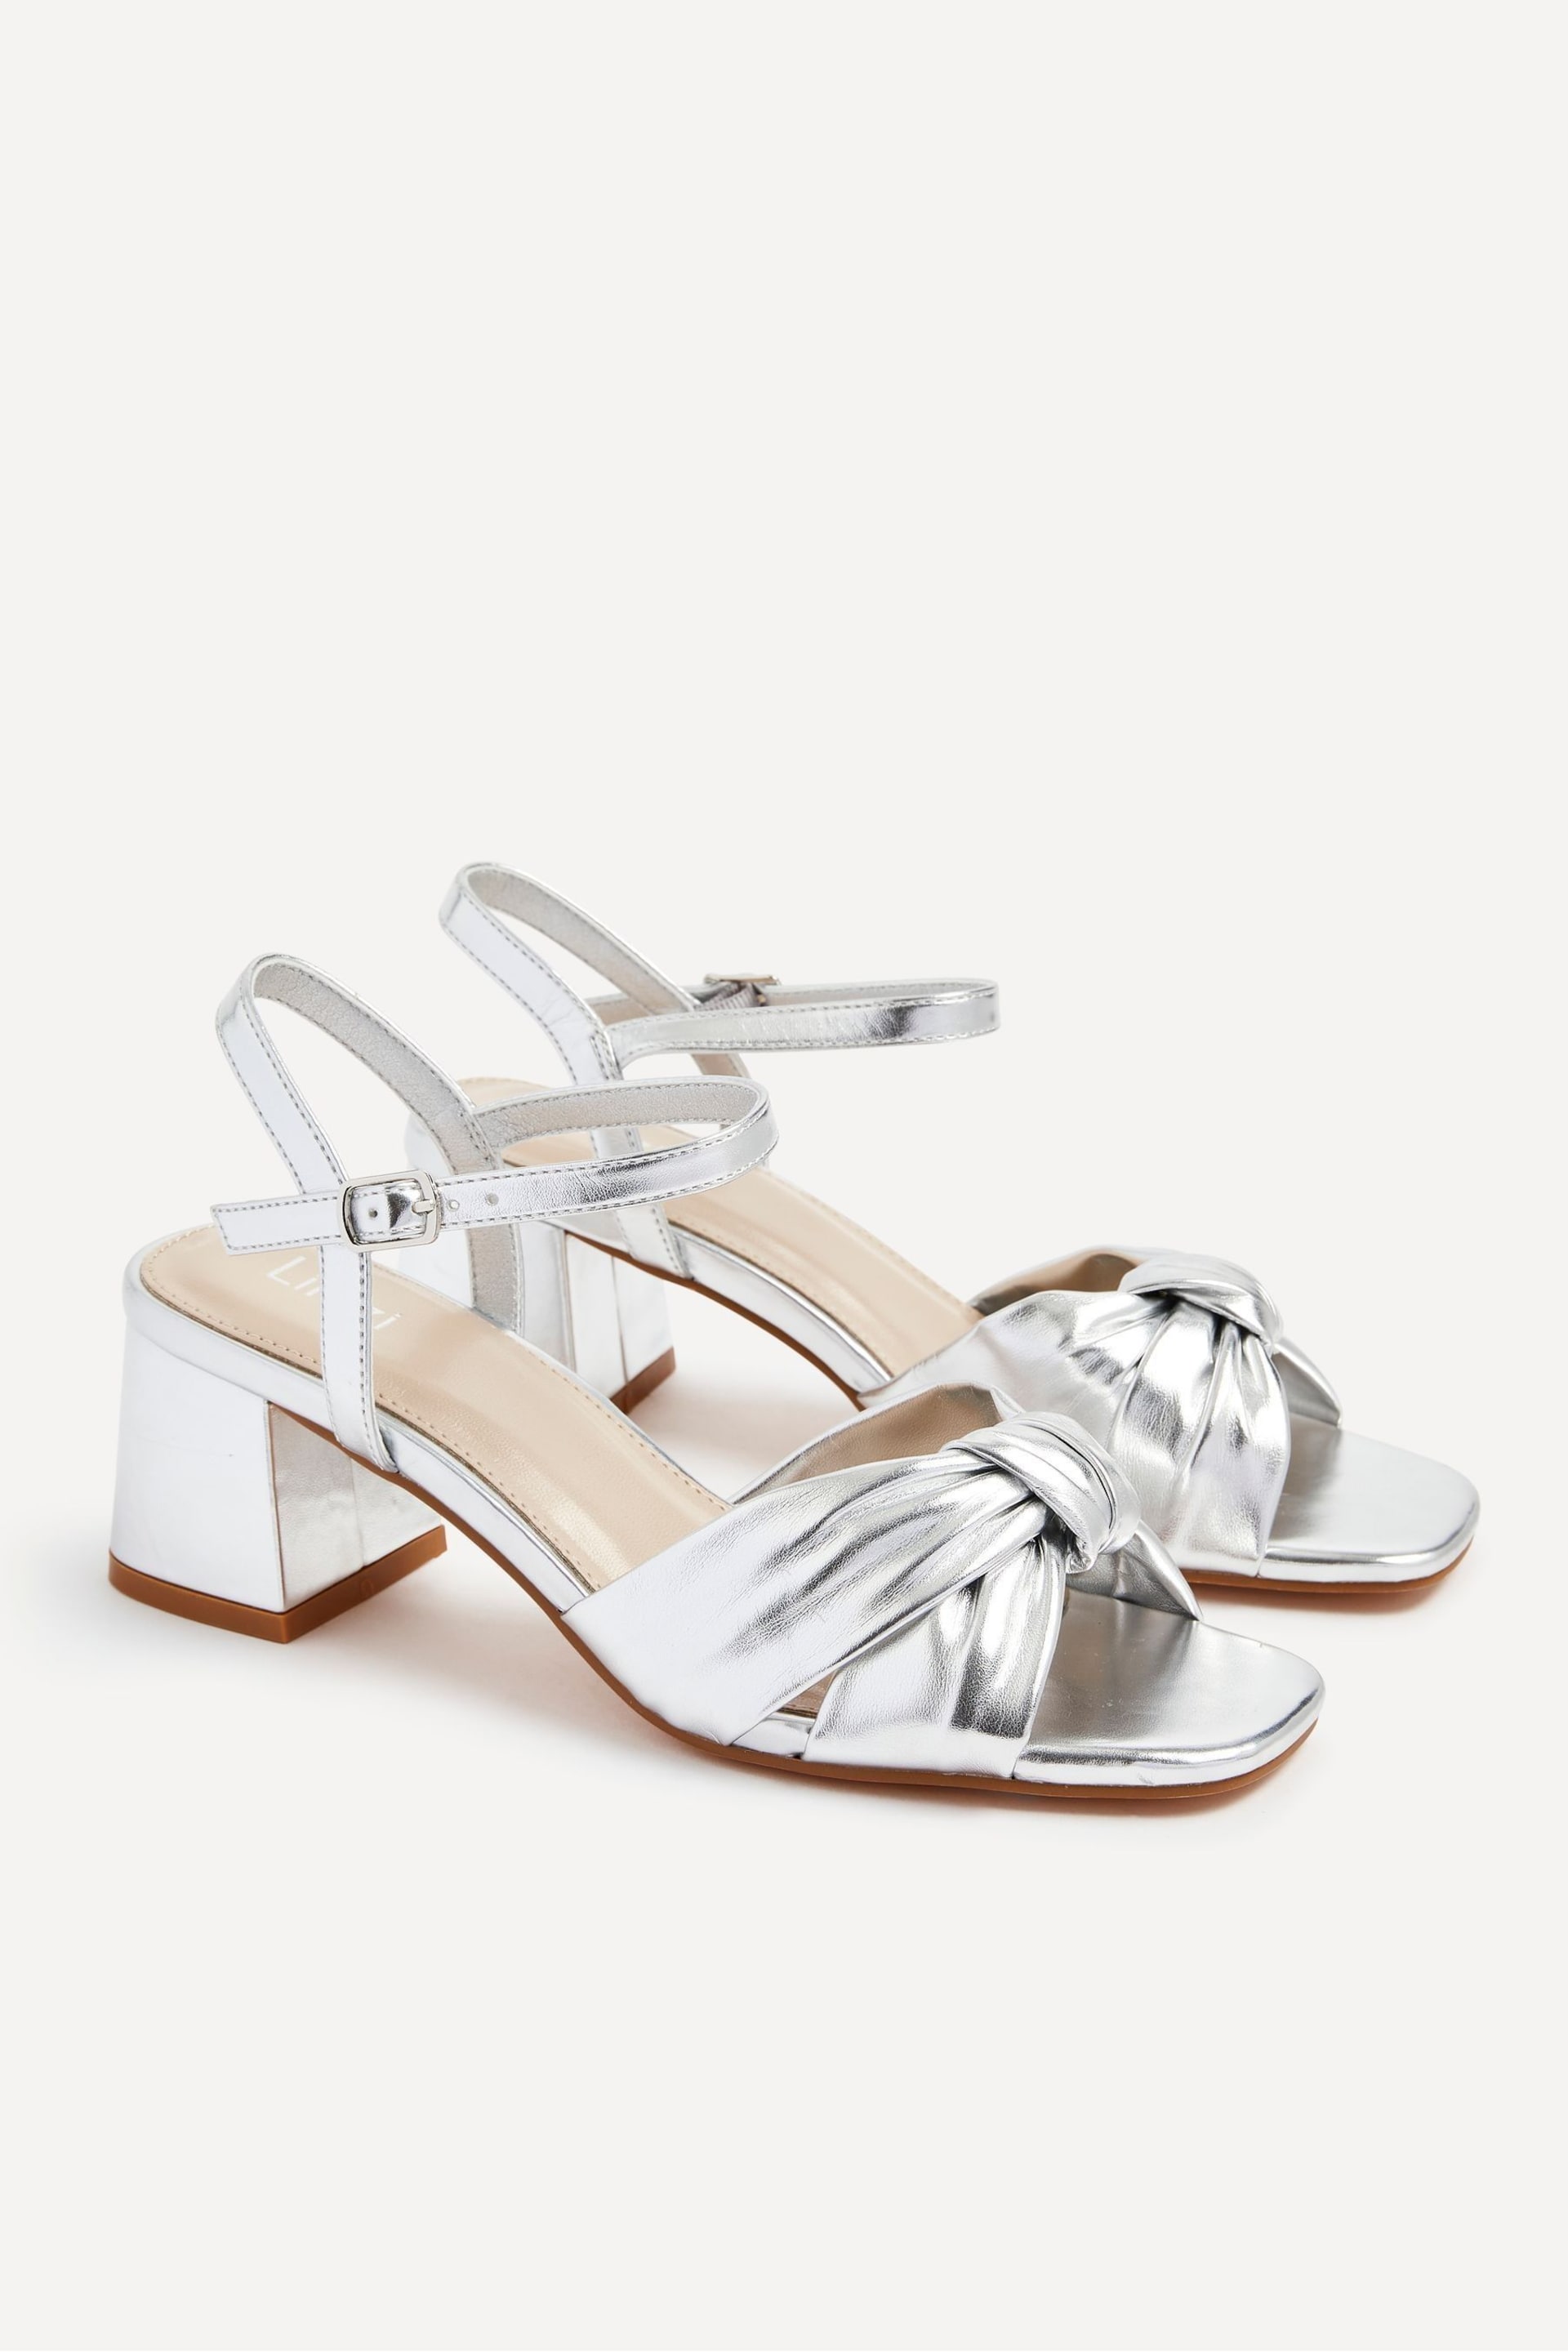 Linzi Silver Charlotte Block Heeled Sandals With Bow Front Detail - Image 4 of 5